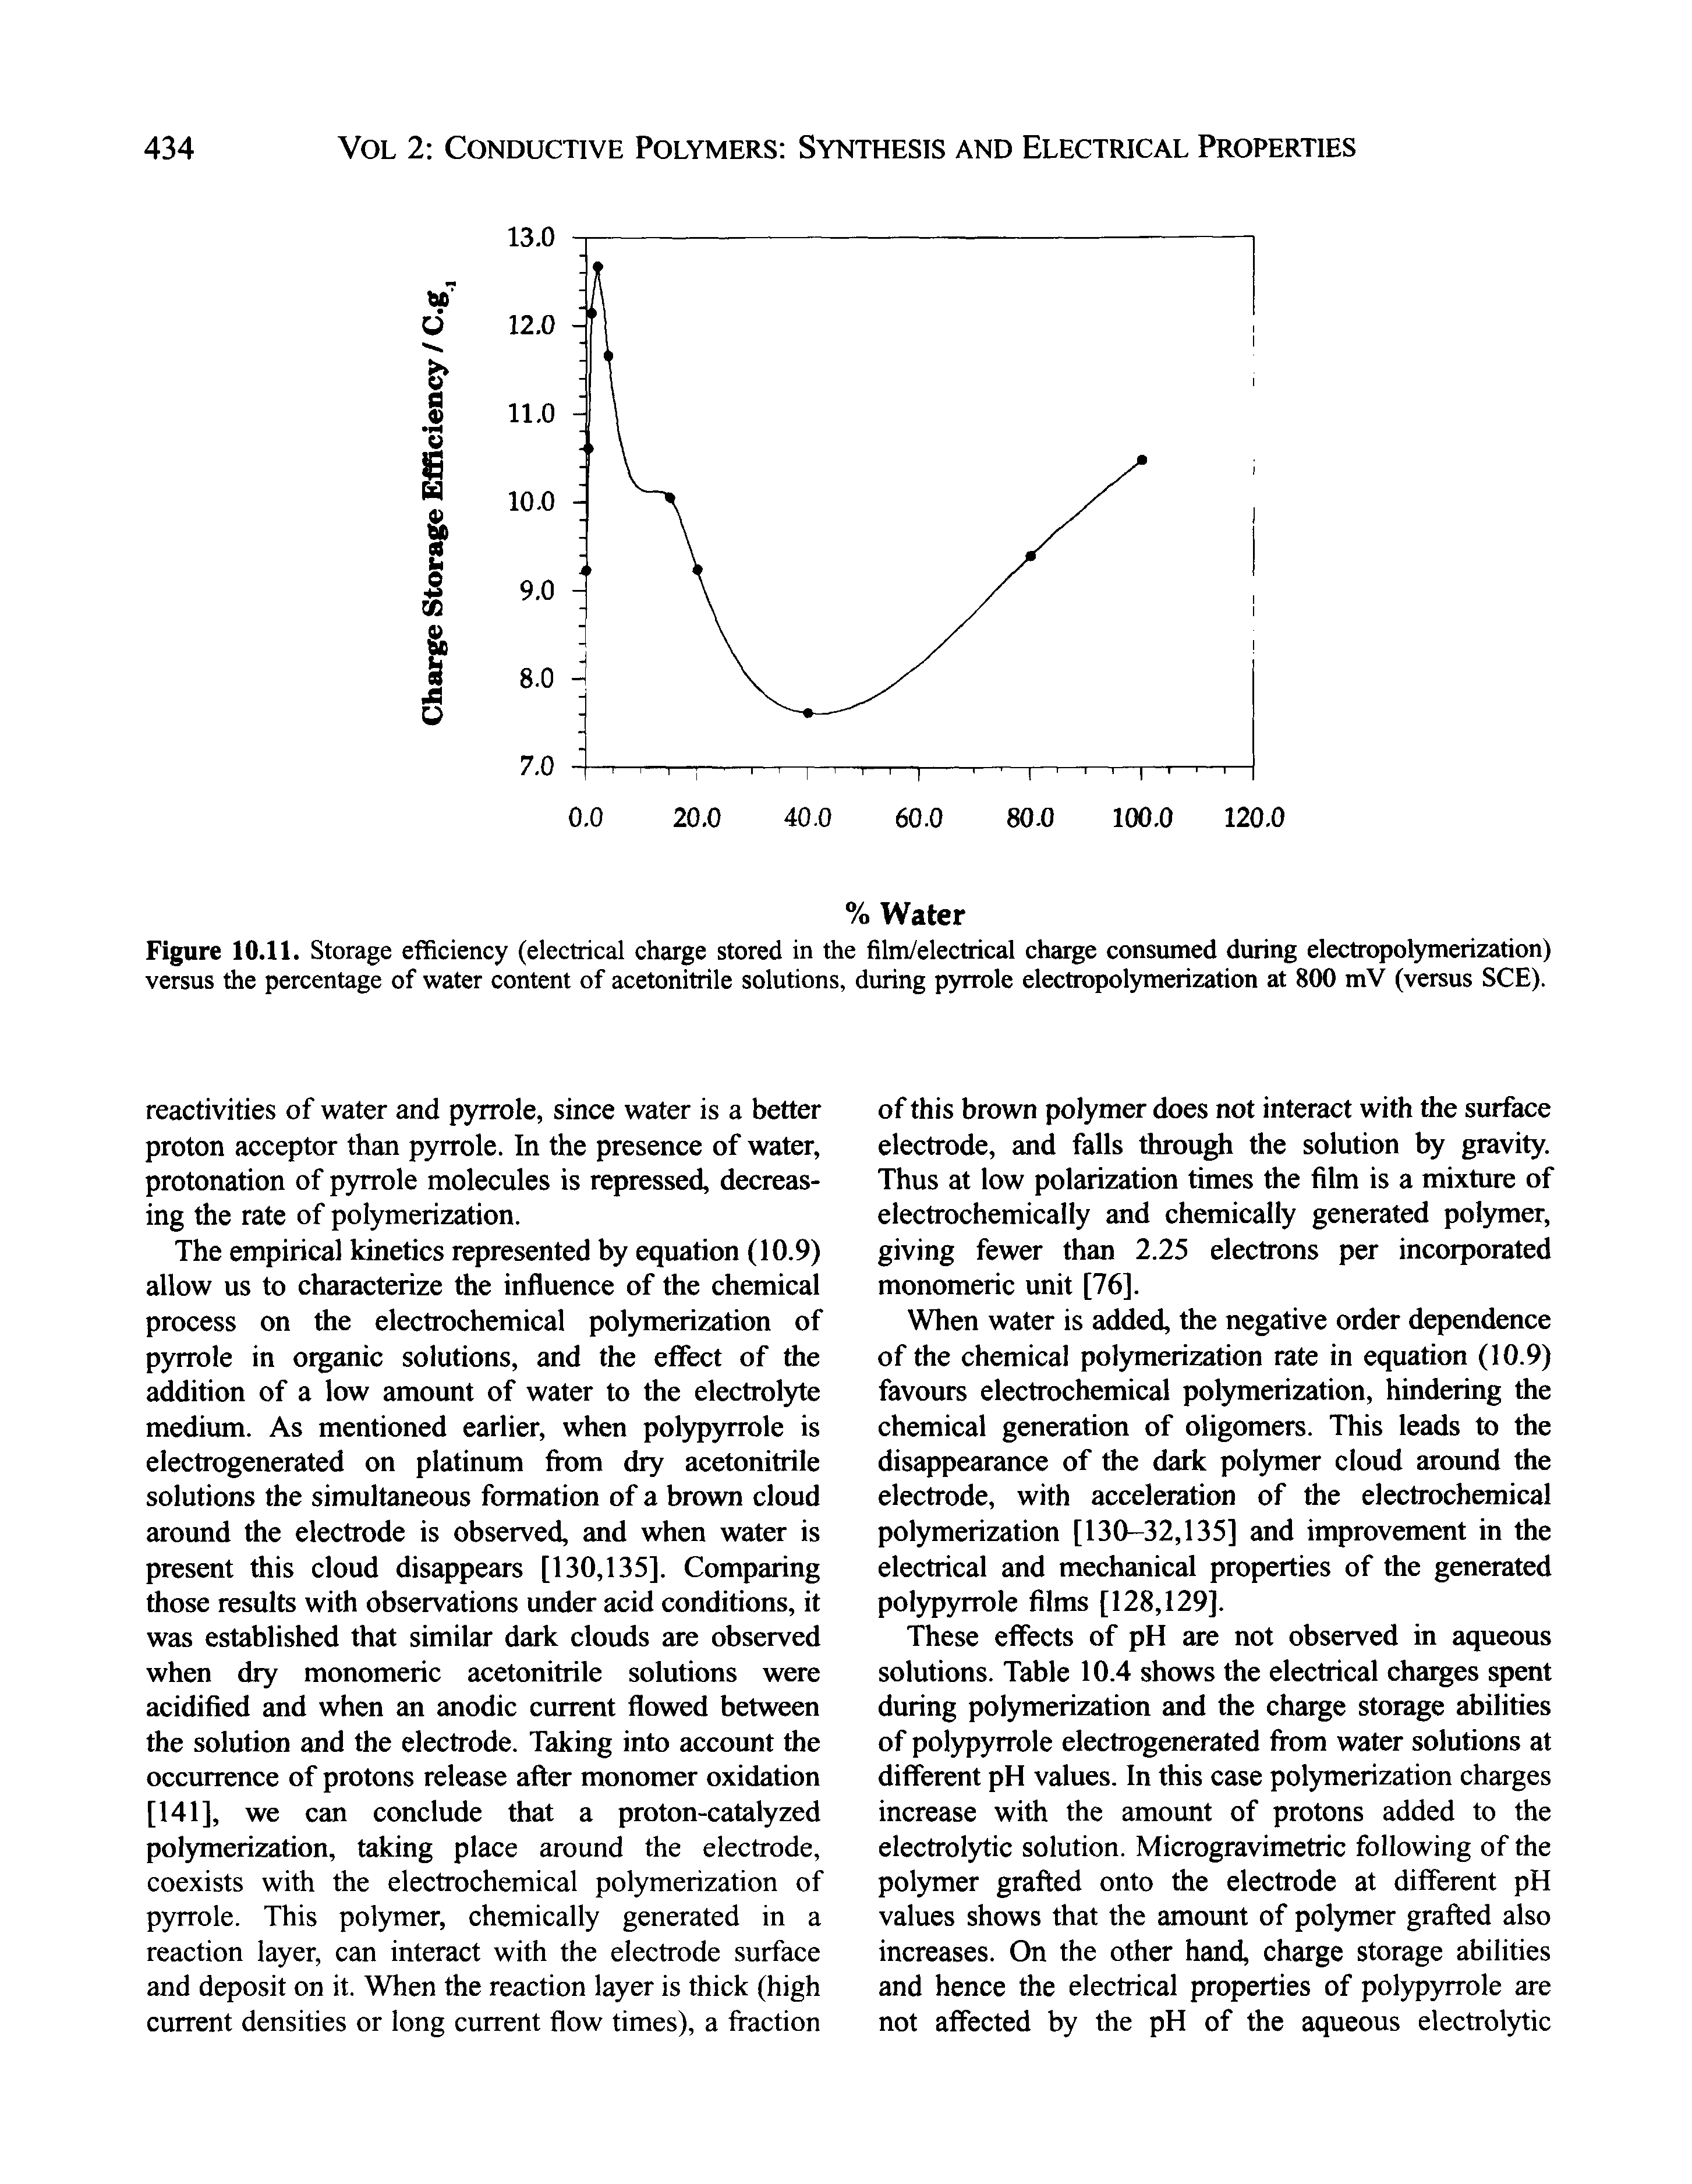 Figure 10.11. Storage efficiency (electrical charge stored in the film/electrical charge consumed during electropolymerization) versus the percentage of water content of acetonitrile solutions, during pyrrole electropolymerization at 800 mV (versus SCE).